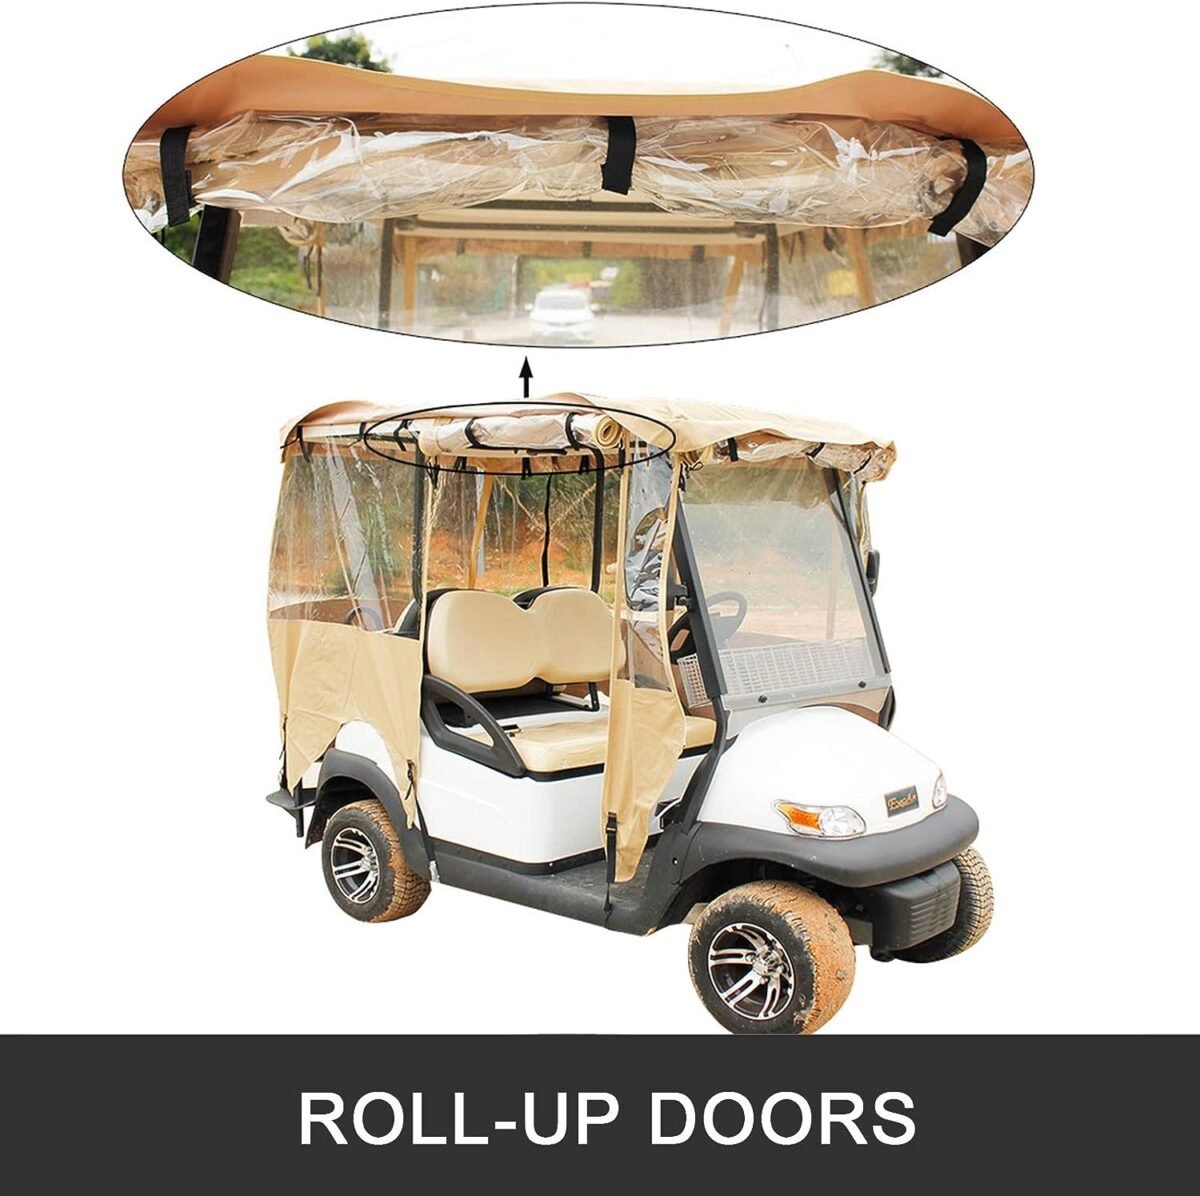 Comparing 5 Golf Cart Covers: Reviews and Comparisons